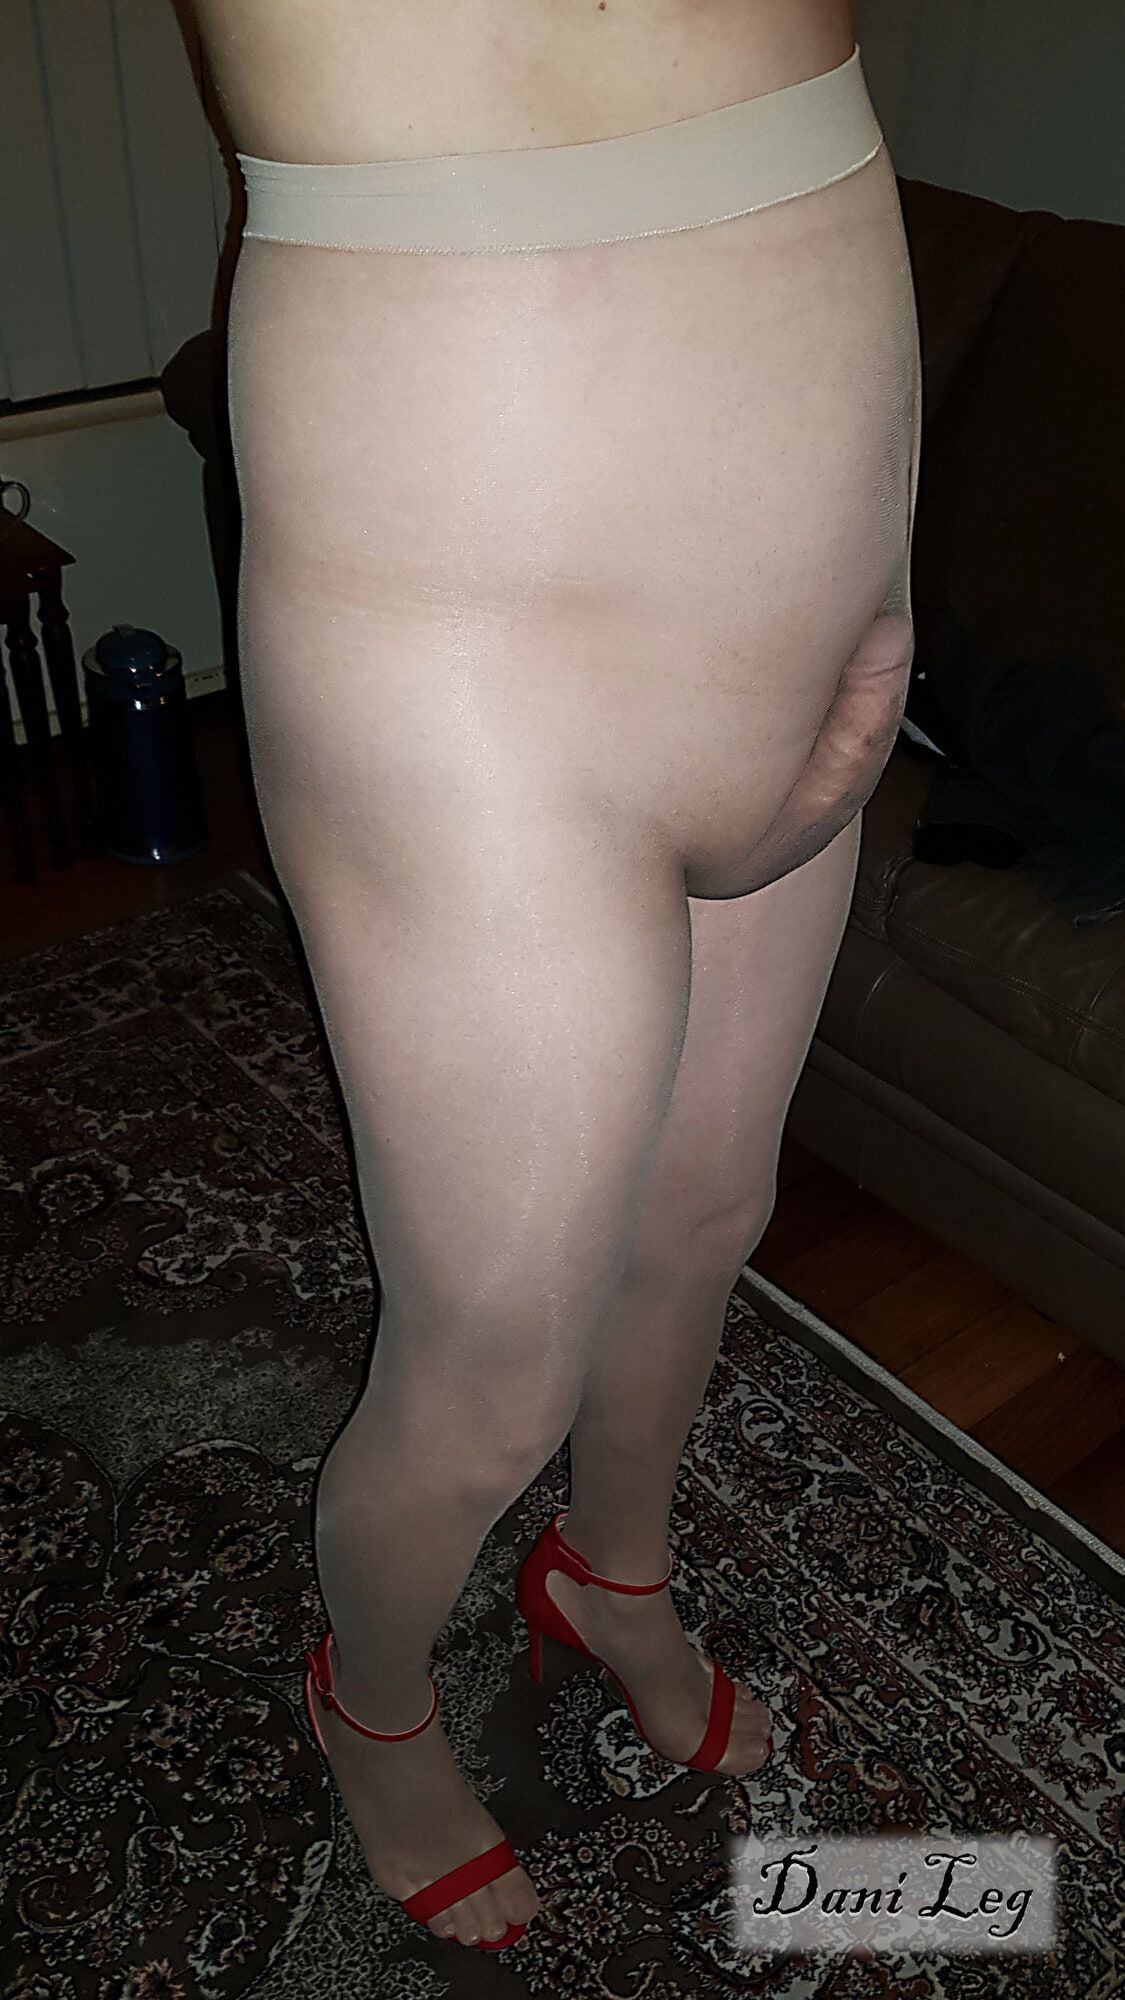 Curvy Legs, Nude Pantyhose and Hot Red Nails and Shoes